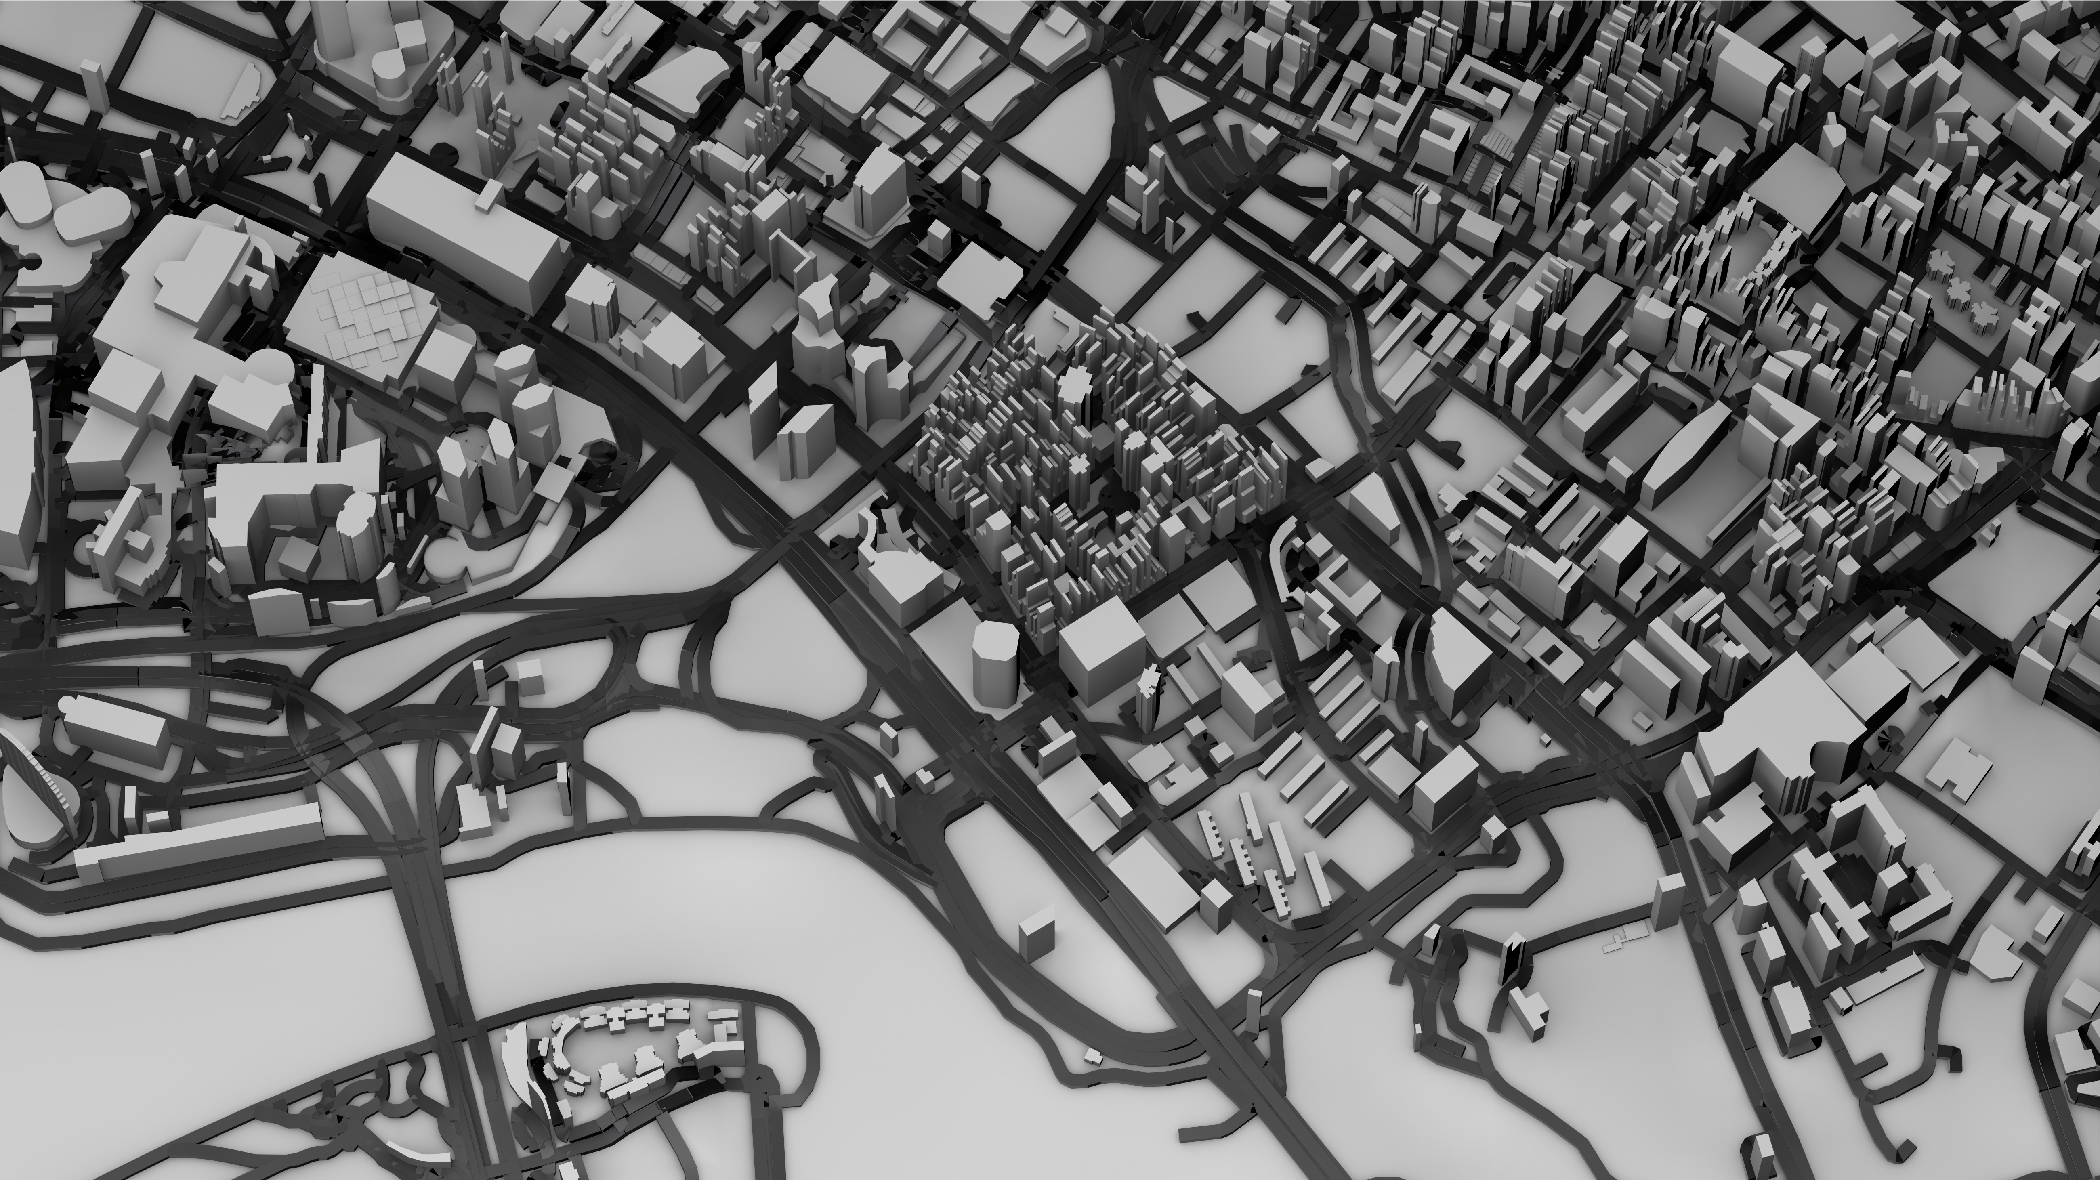 A map with 3D buildings is shown emphasizing the impact of GIS on the built environment.